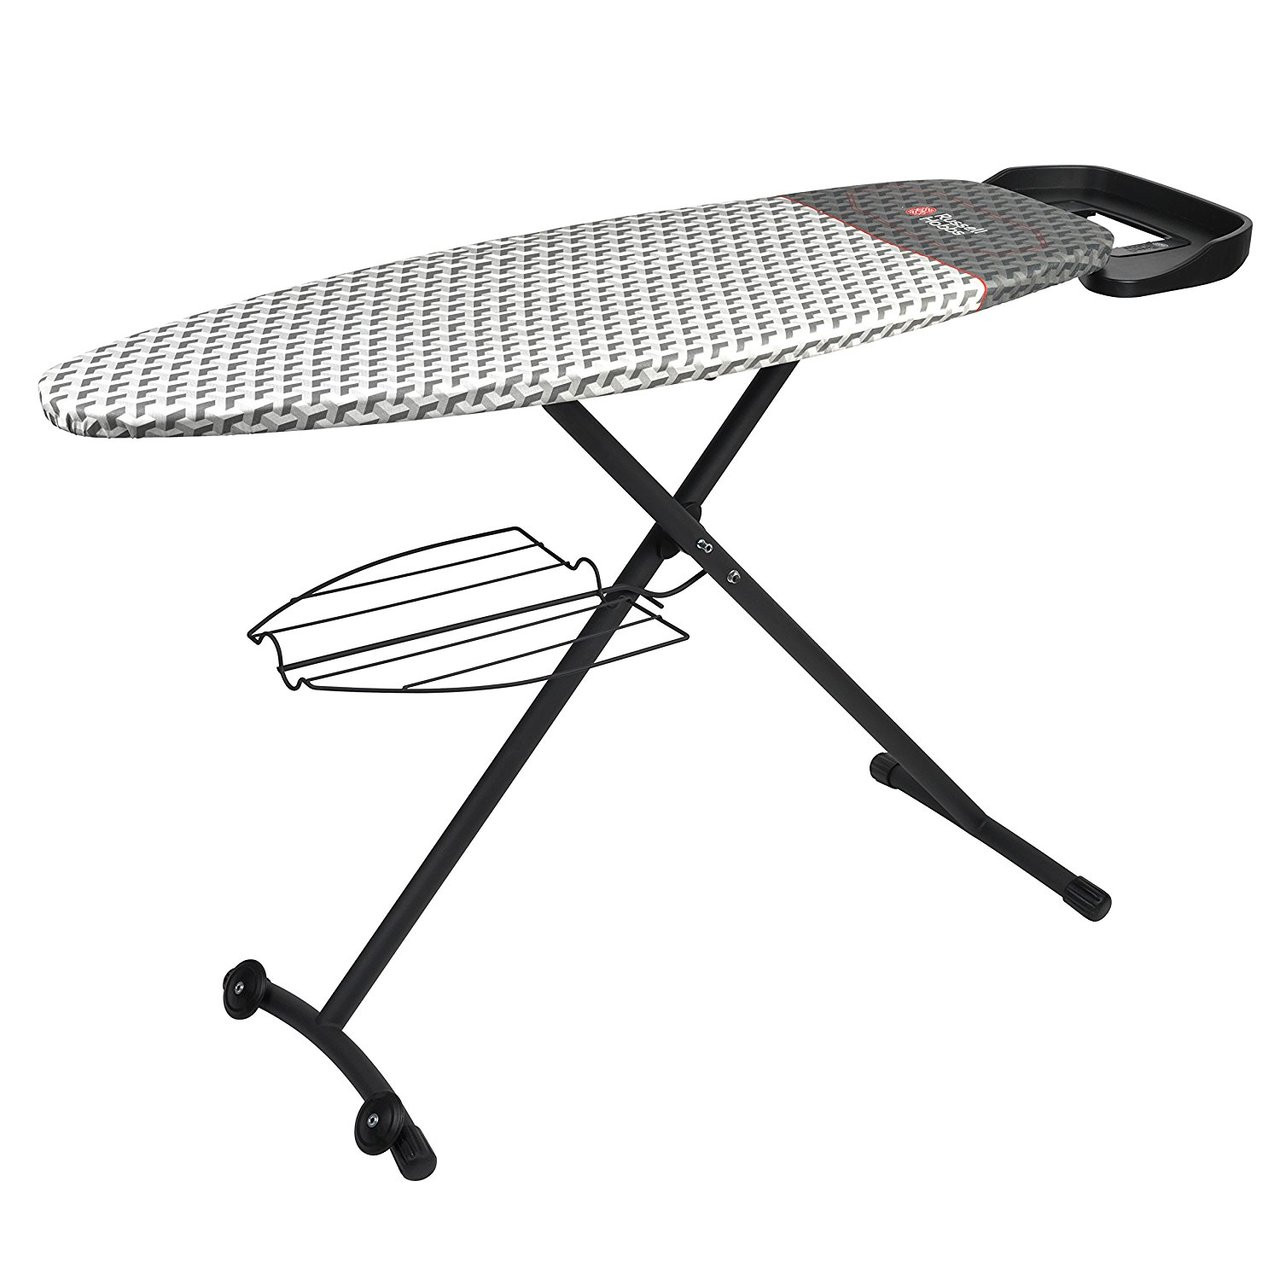 An image of Russell Hobbs CUBIC 134 x 45cm Ironing Board